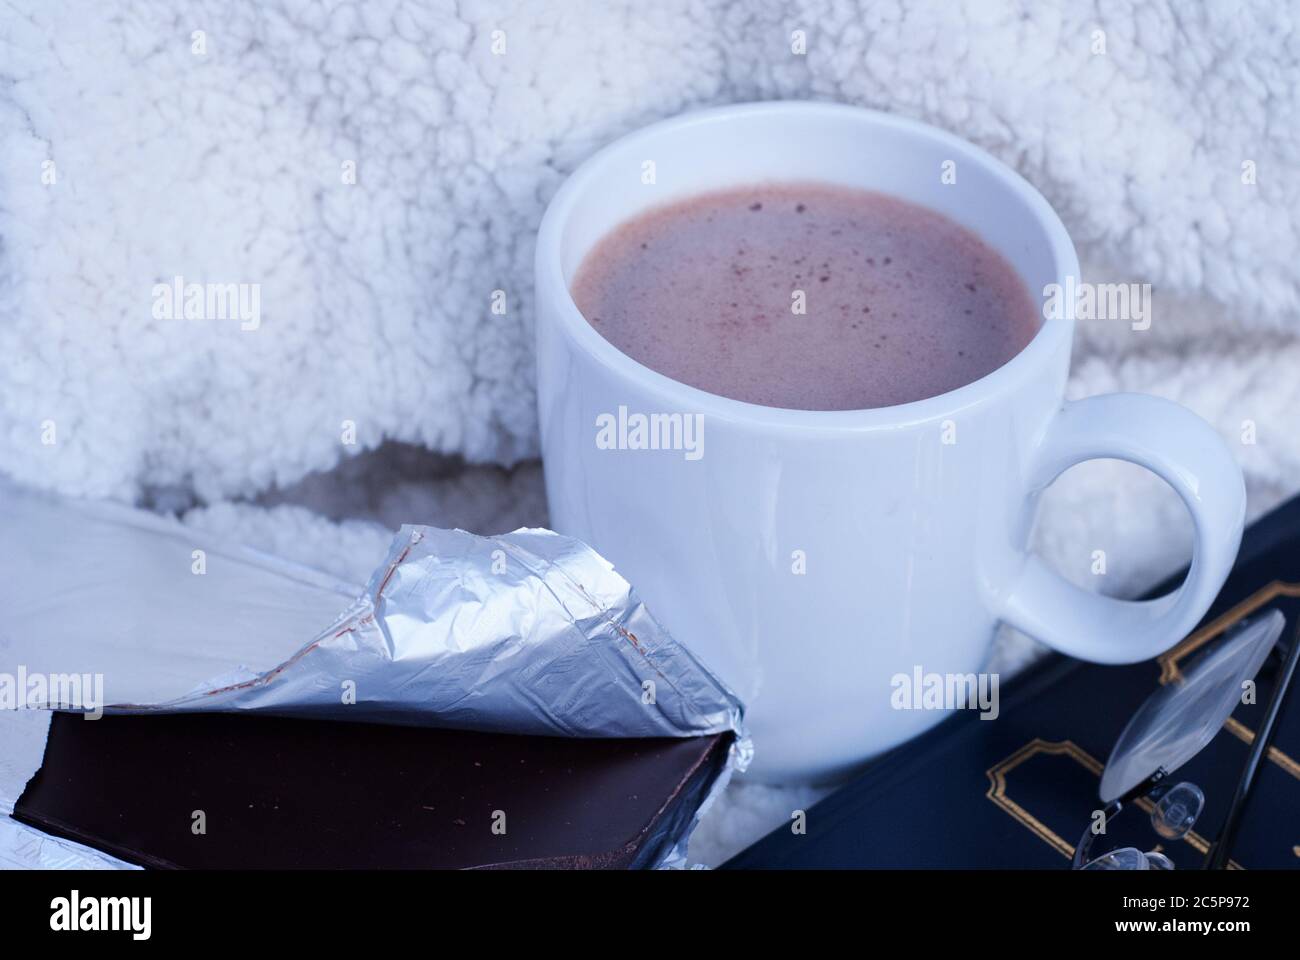 Conceptual image, hot chocolate, dark chocolate with a book and eyeglasses or spectacles on a sheepskin blanket. Stock Photo